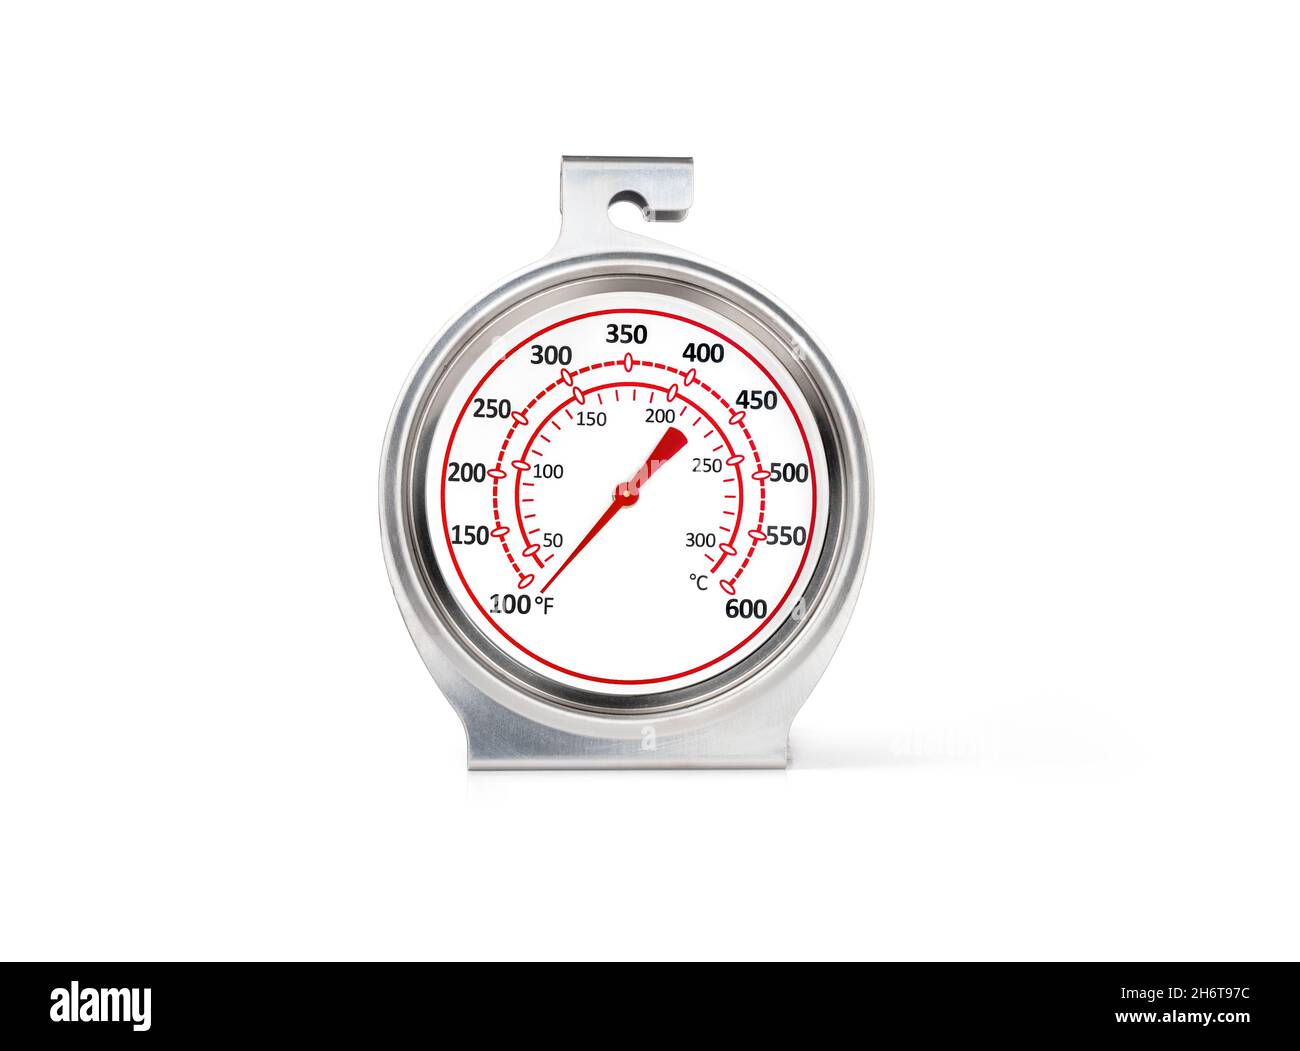 https://c8.alamy.com/comp/2H6T97C/oven-thermometer-with-analog-dial-face-and-red-arrow-cooking-kitchen-gadget-to-measure-or-test-accuracy-of-high-temperatures-in-fahrenheit-and-celsiu-2H6T97C.jpg